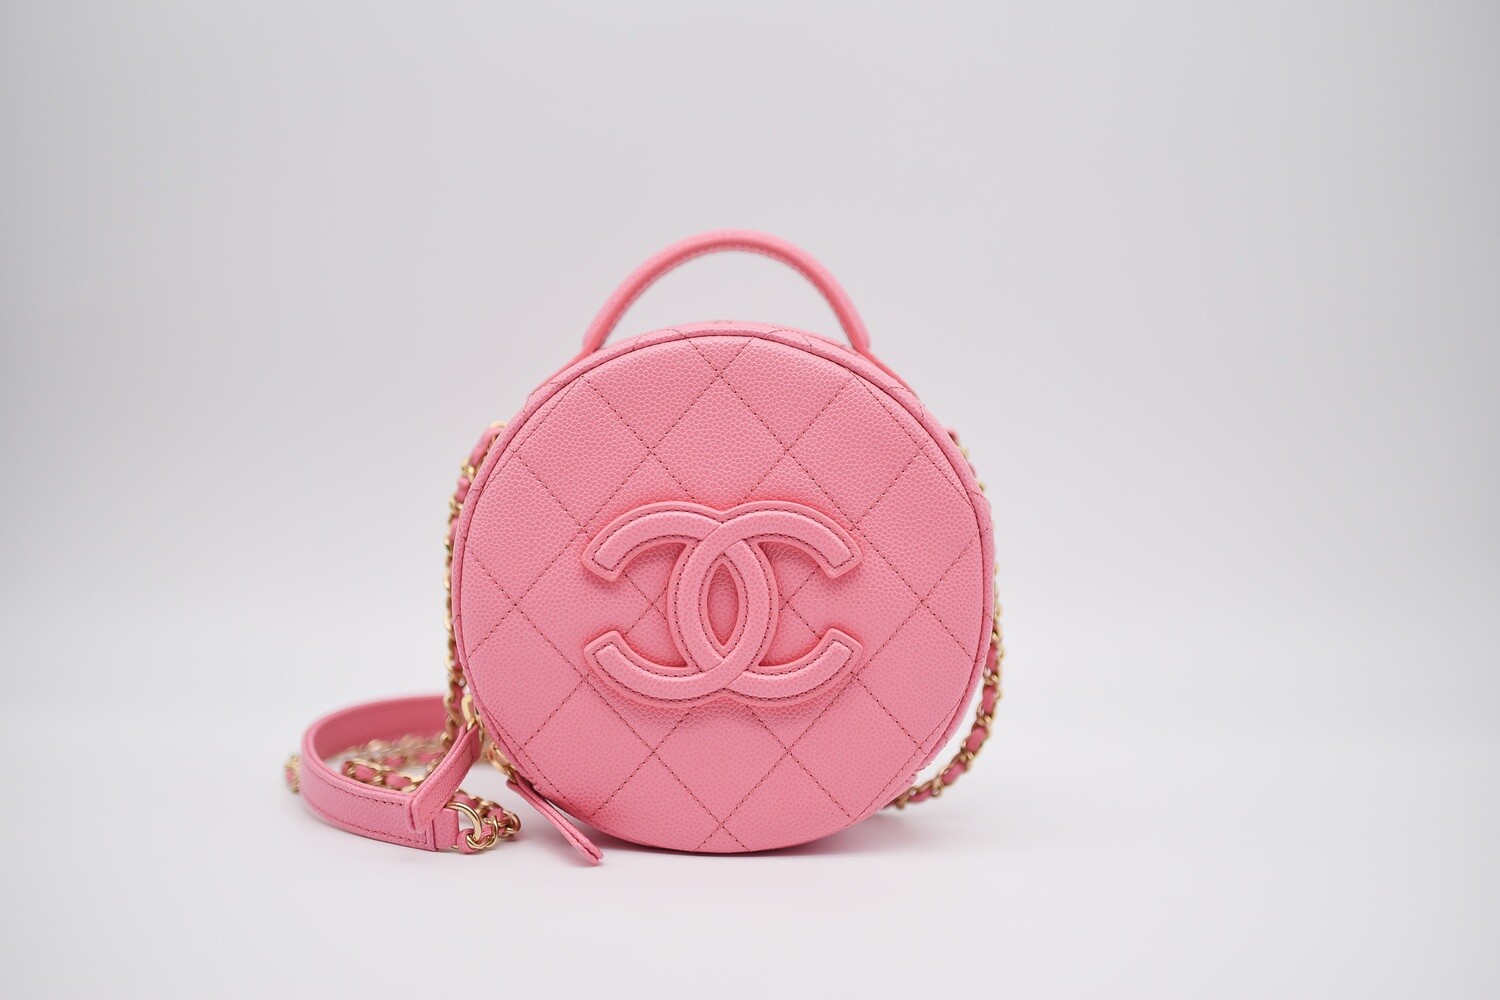 Chanel Round Top Handle Bag, Pink Caviar Leather, Gold Hardware